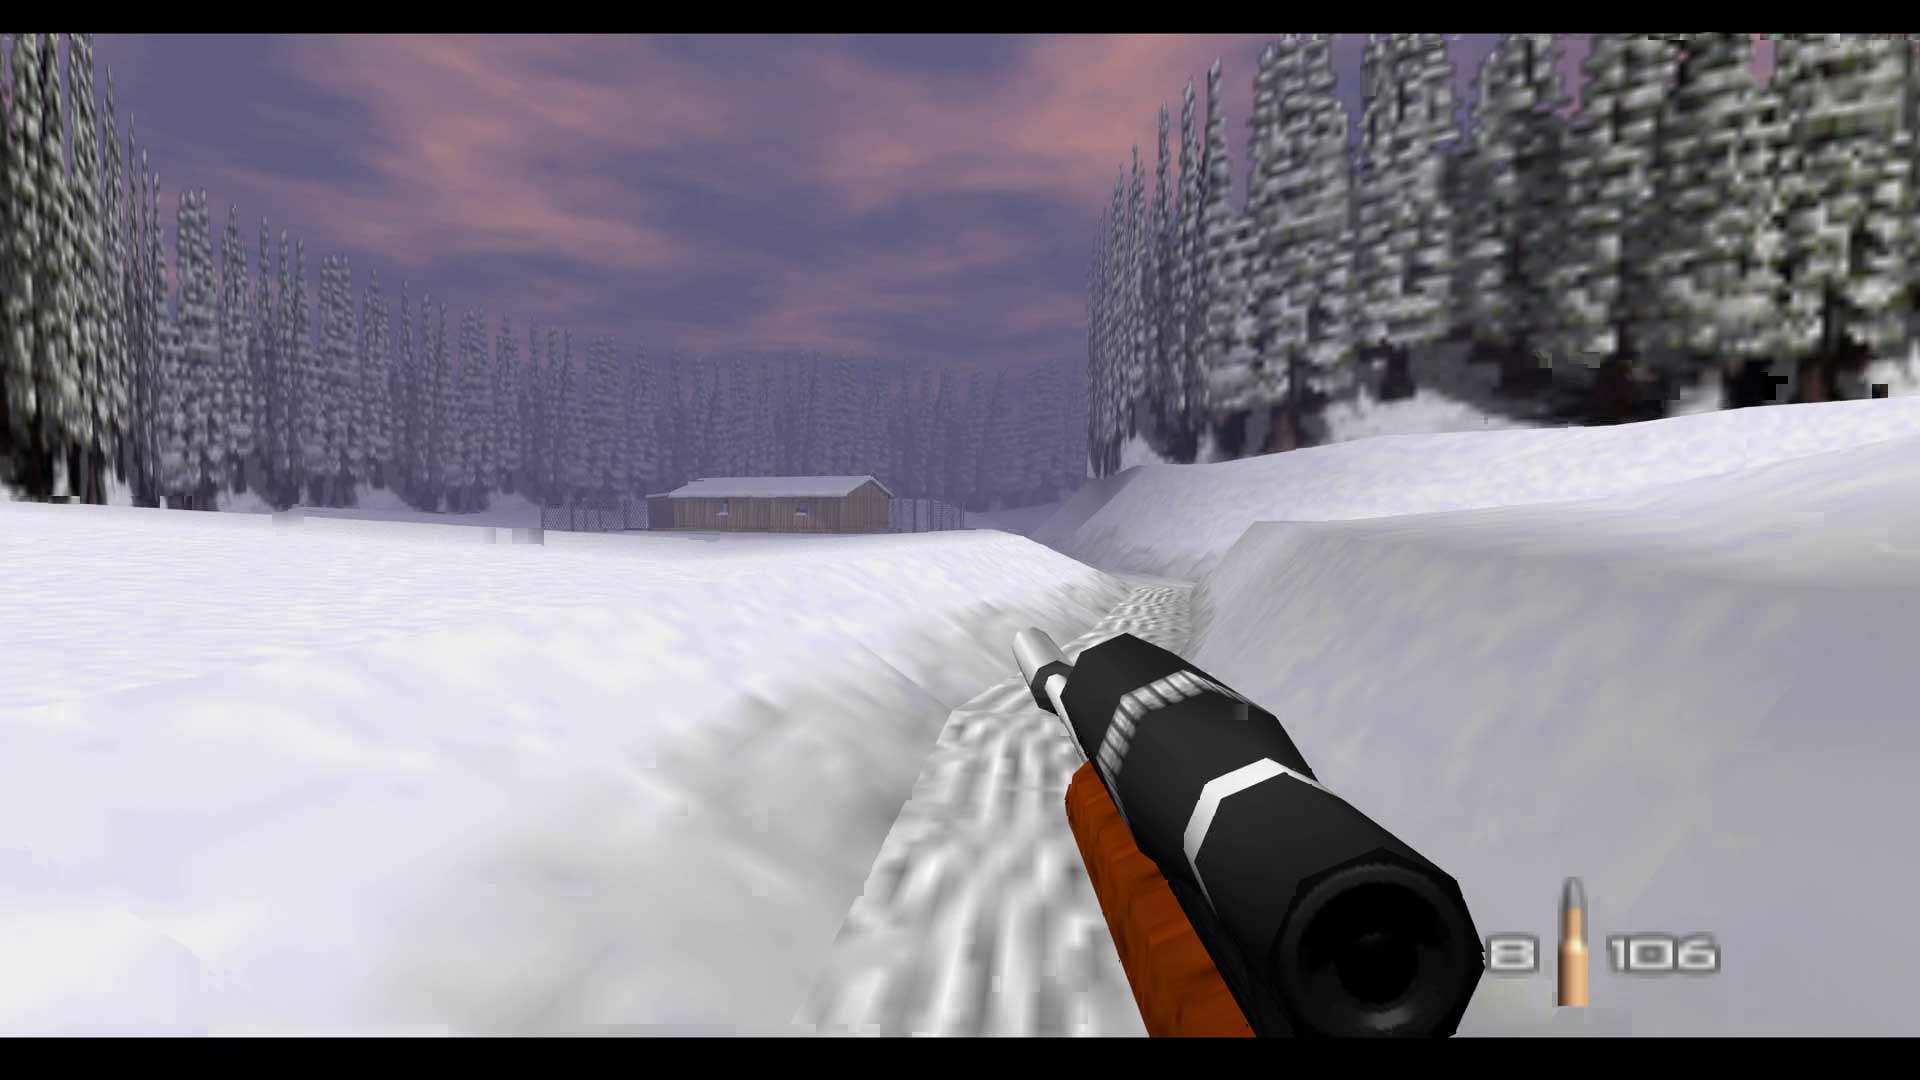 Let's Play GoldenEye 007 on Xbox Series X: Surface Level Gameplay and Tips